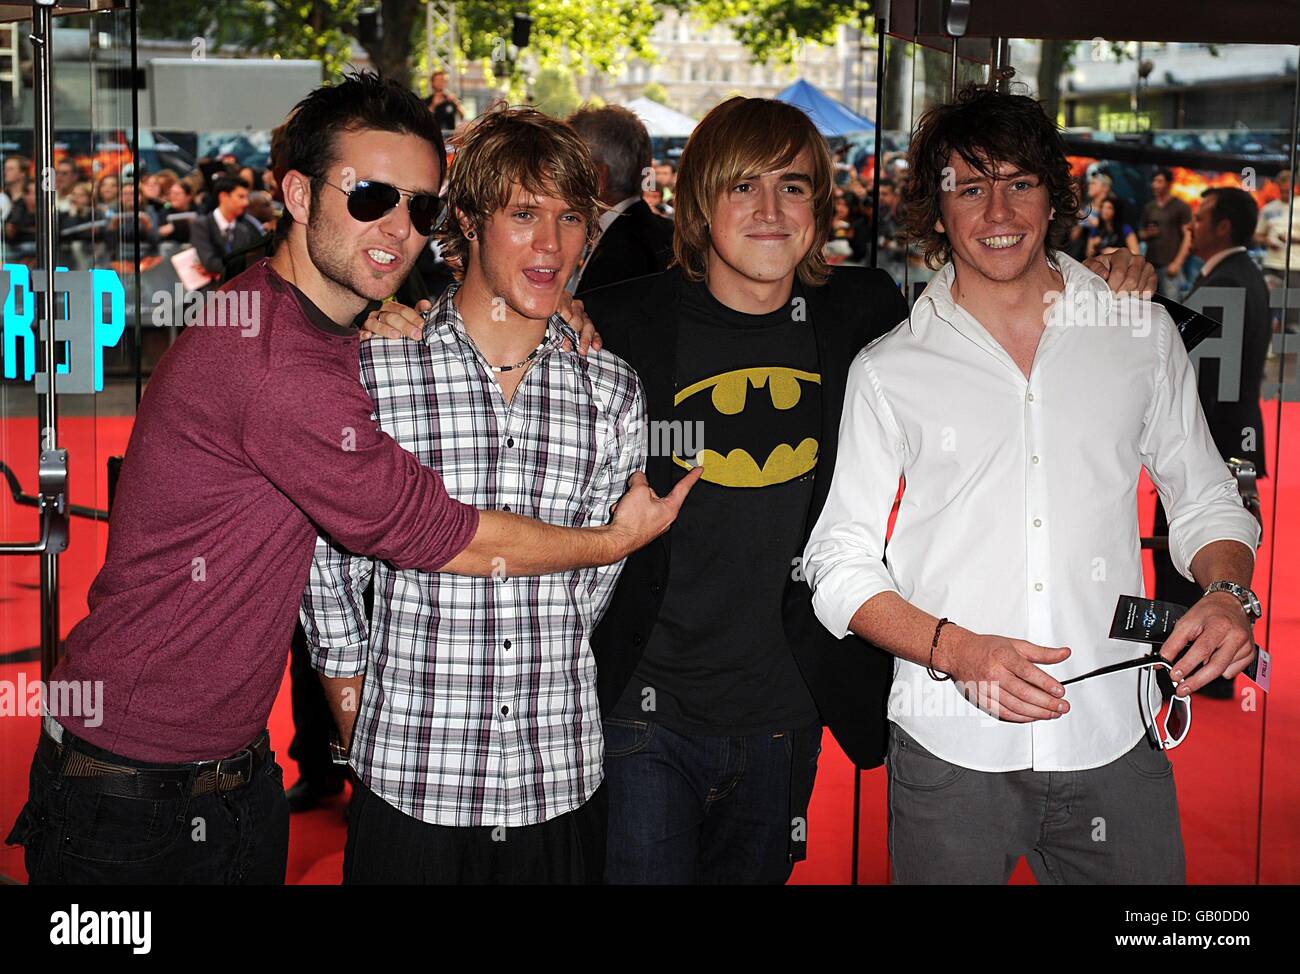 (left to right) Harry Judd, Dougie Poynter, Tom Fletcher and Danny Jones of McFly arrive for the European premiere of 'The Dark Knight' at the Odeon West End Cinema, Leicester Square, London. Stock Photo